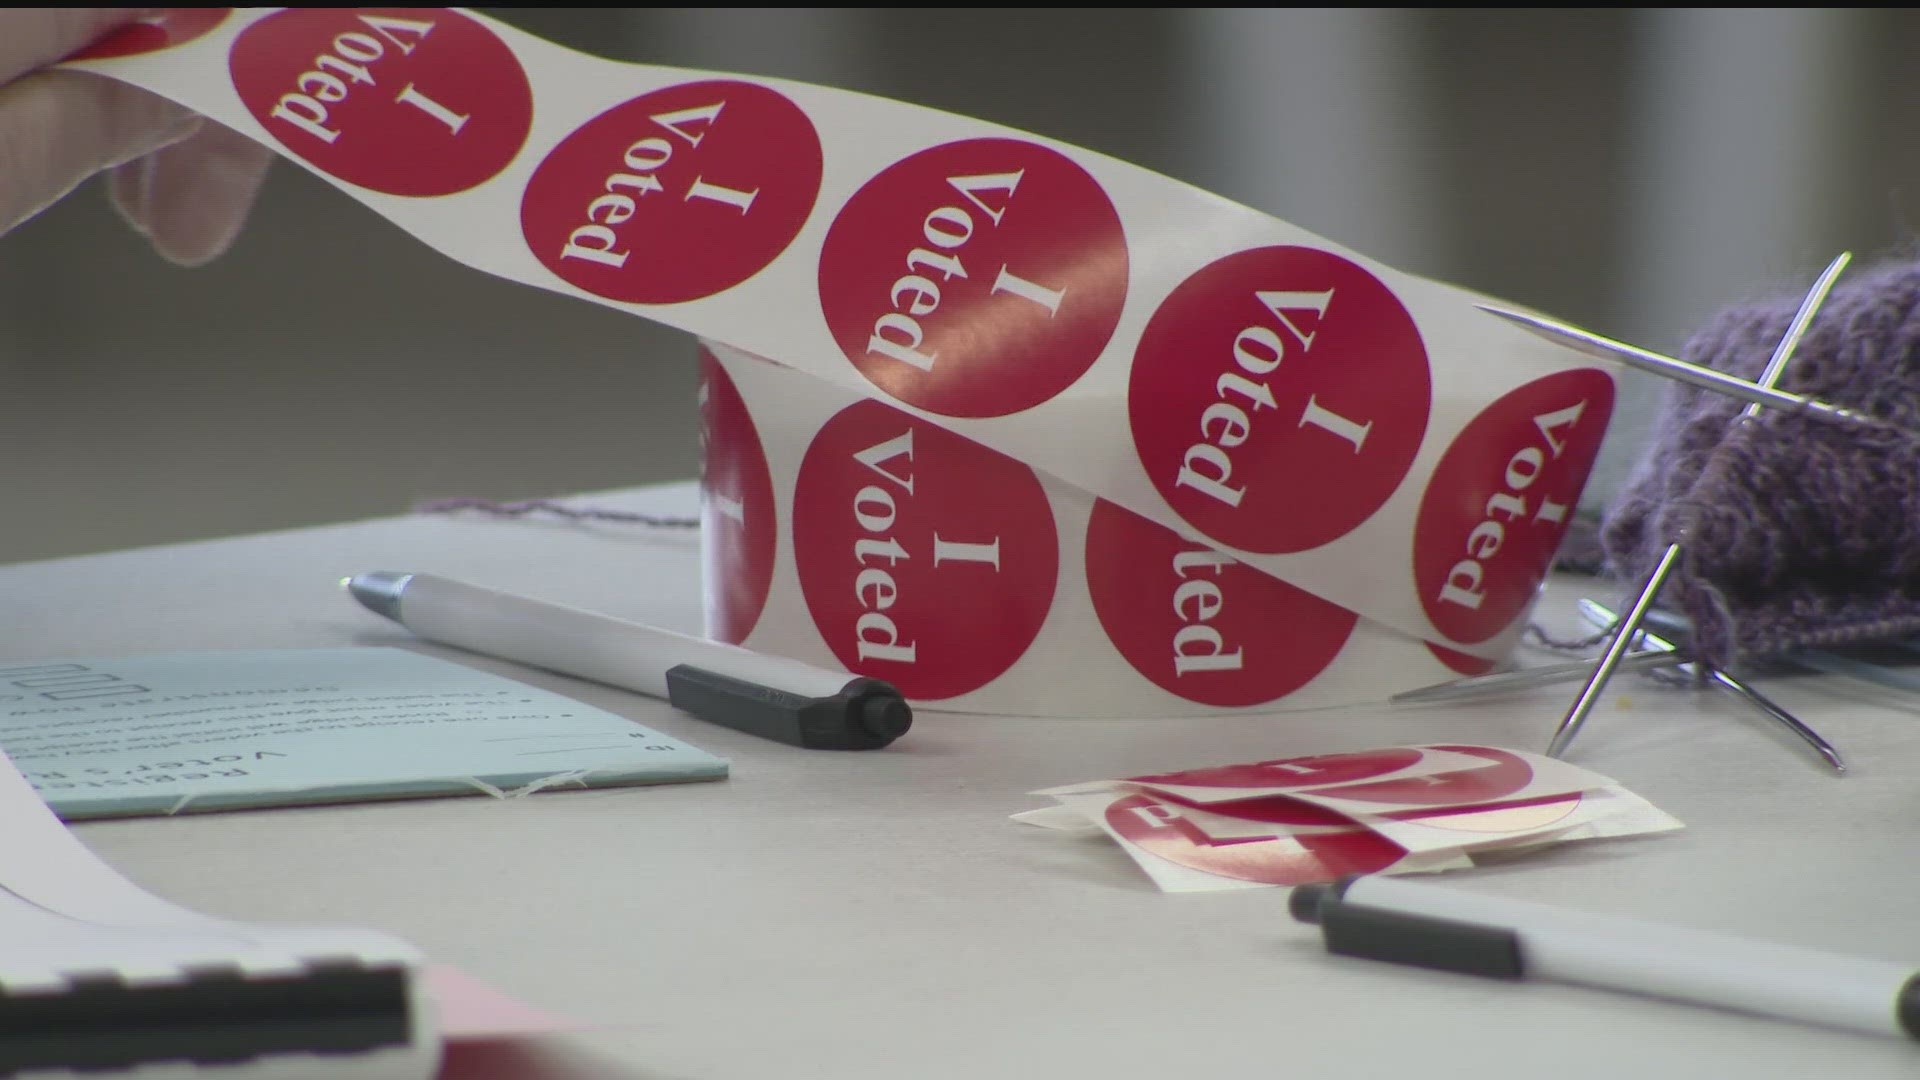 According to the Minnesota School Boards Association, the nearly 200 school board candidates running for more than 100 seats statewide are part of a rising trend.